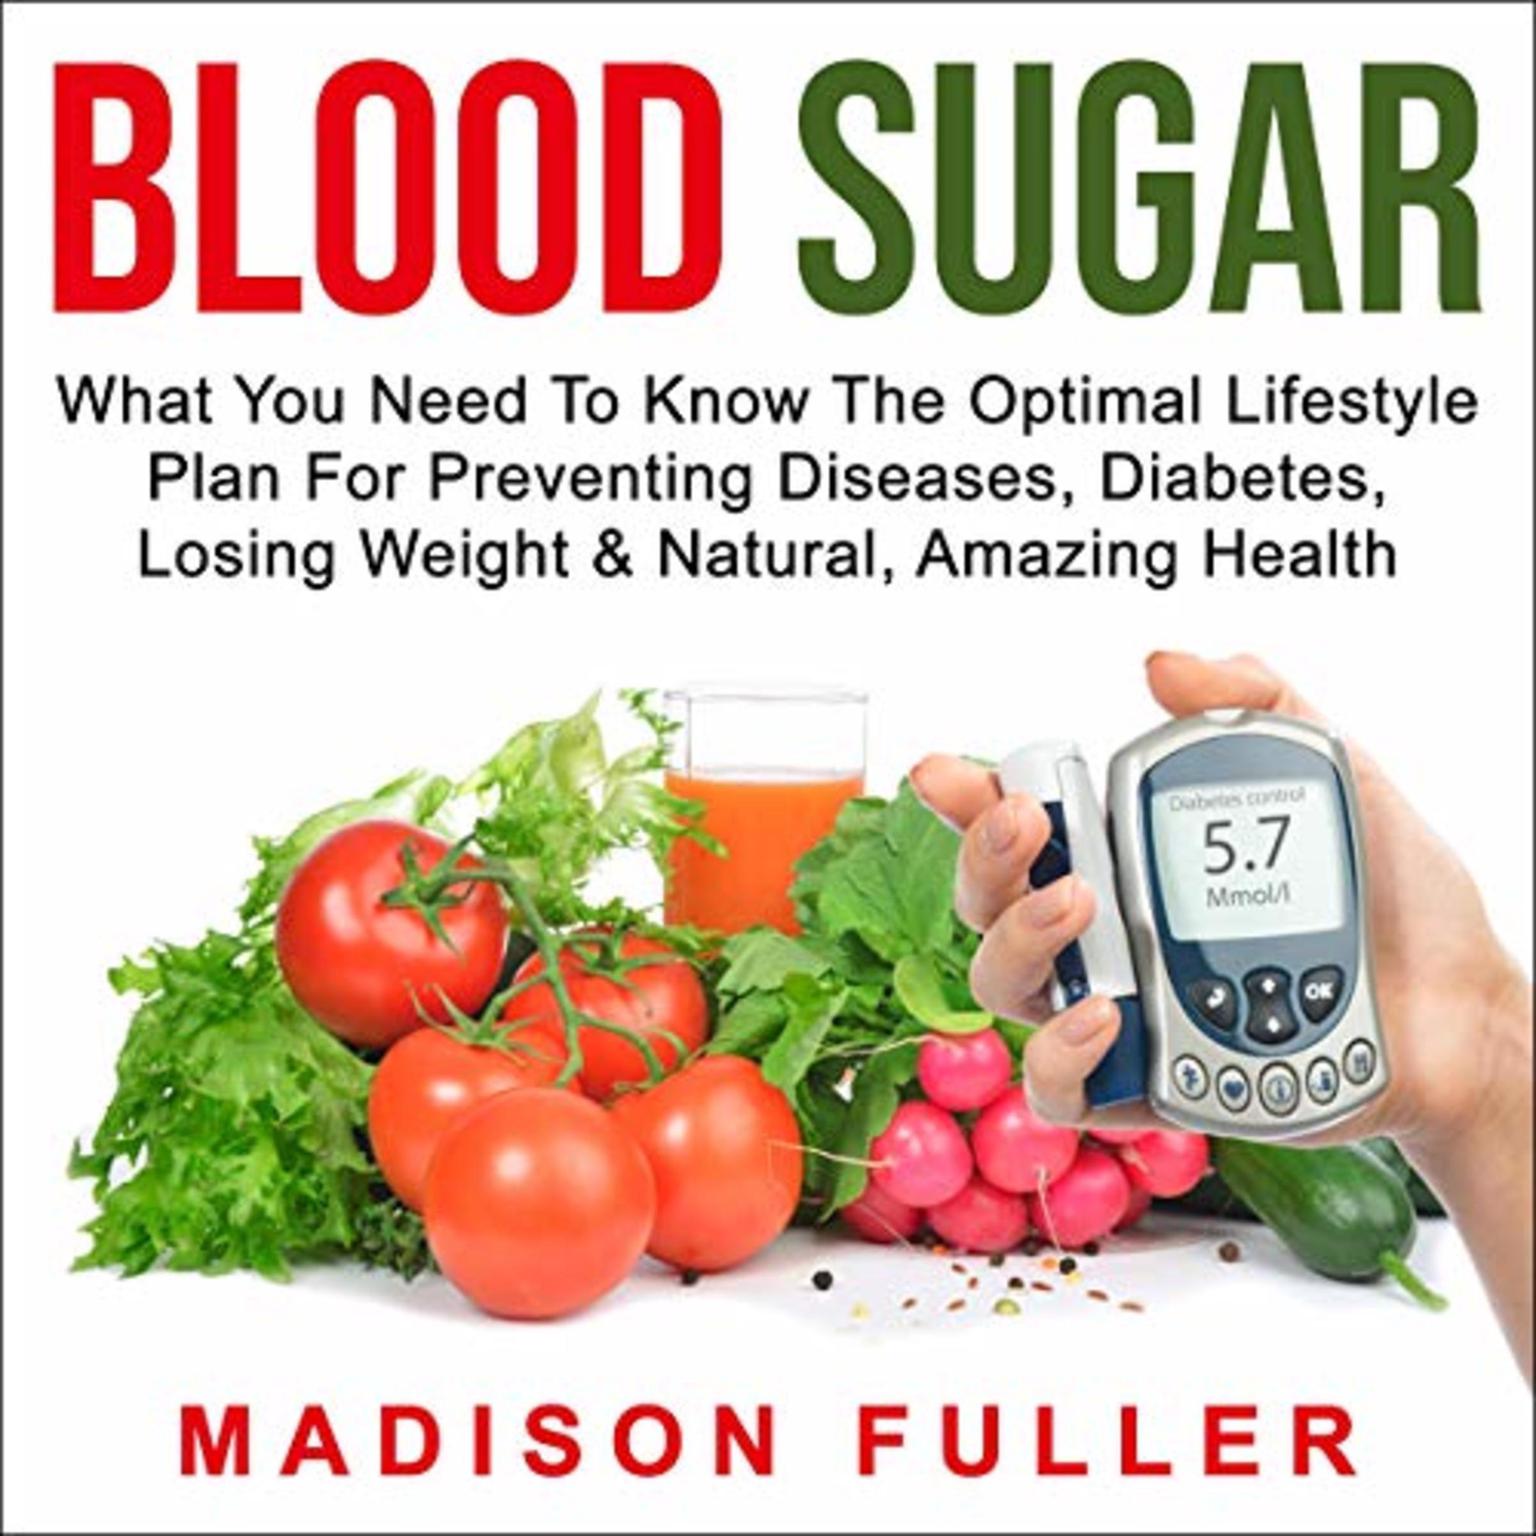 Blood Sugar: What You Need To Know, The Optimal Lifestyle Plan For Preventing Diseases, Diabetes, Losing Weight & Natural, Amazing Health Audiobook, by Madison Fuller